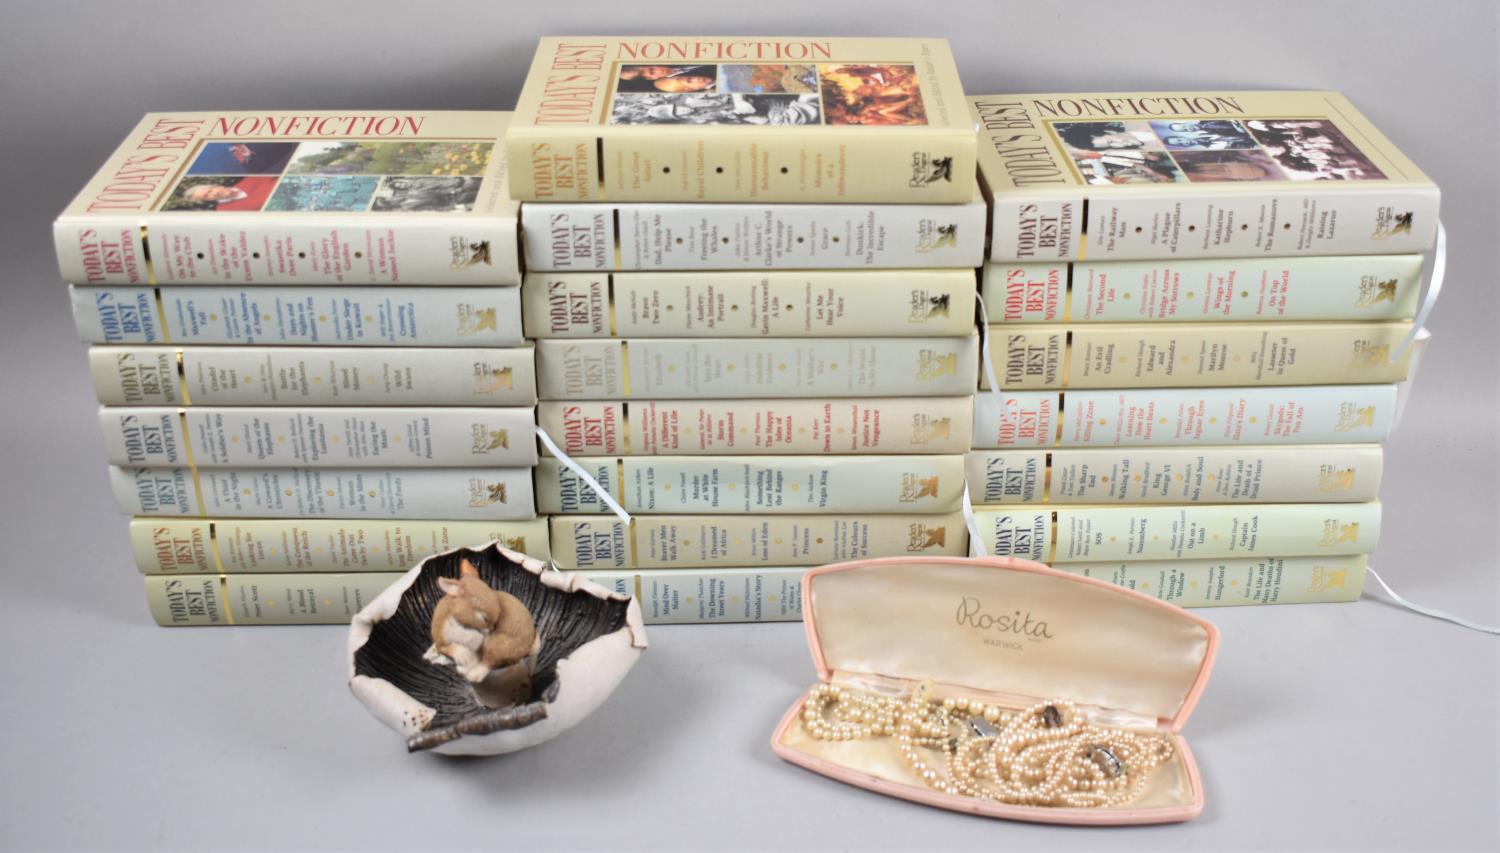 A Collection of Readers Digest Non-fiction Compilations, Mushroom Ornament and Faux Pearls etc